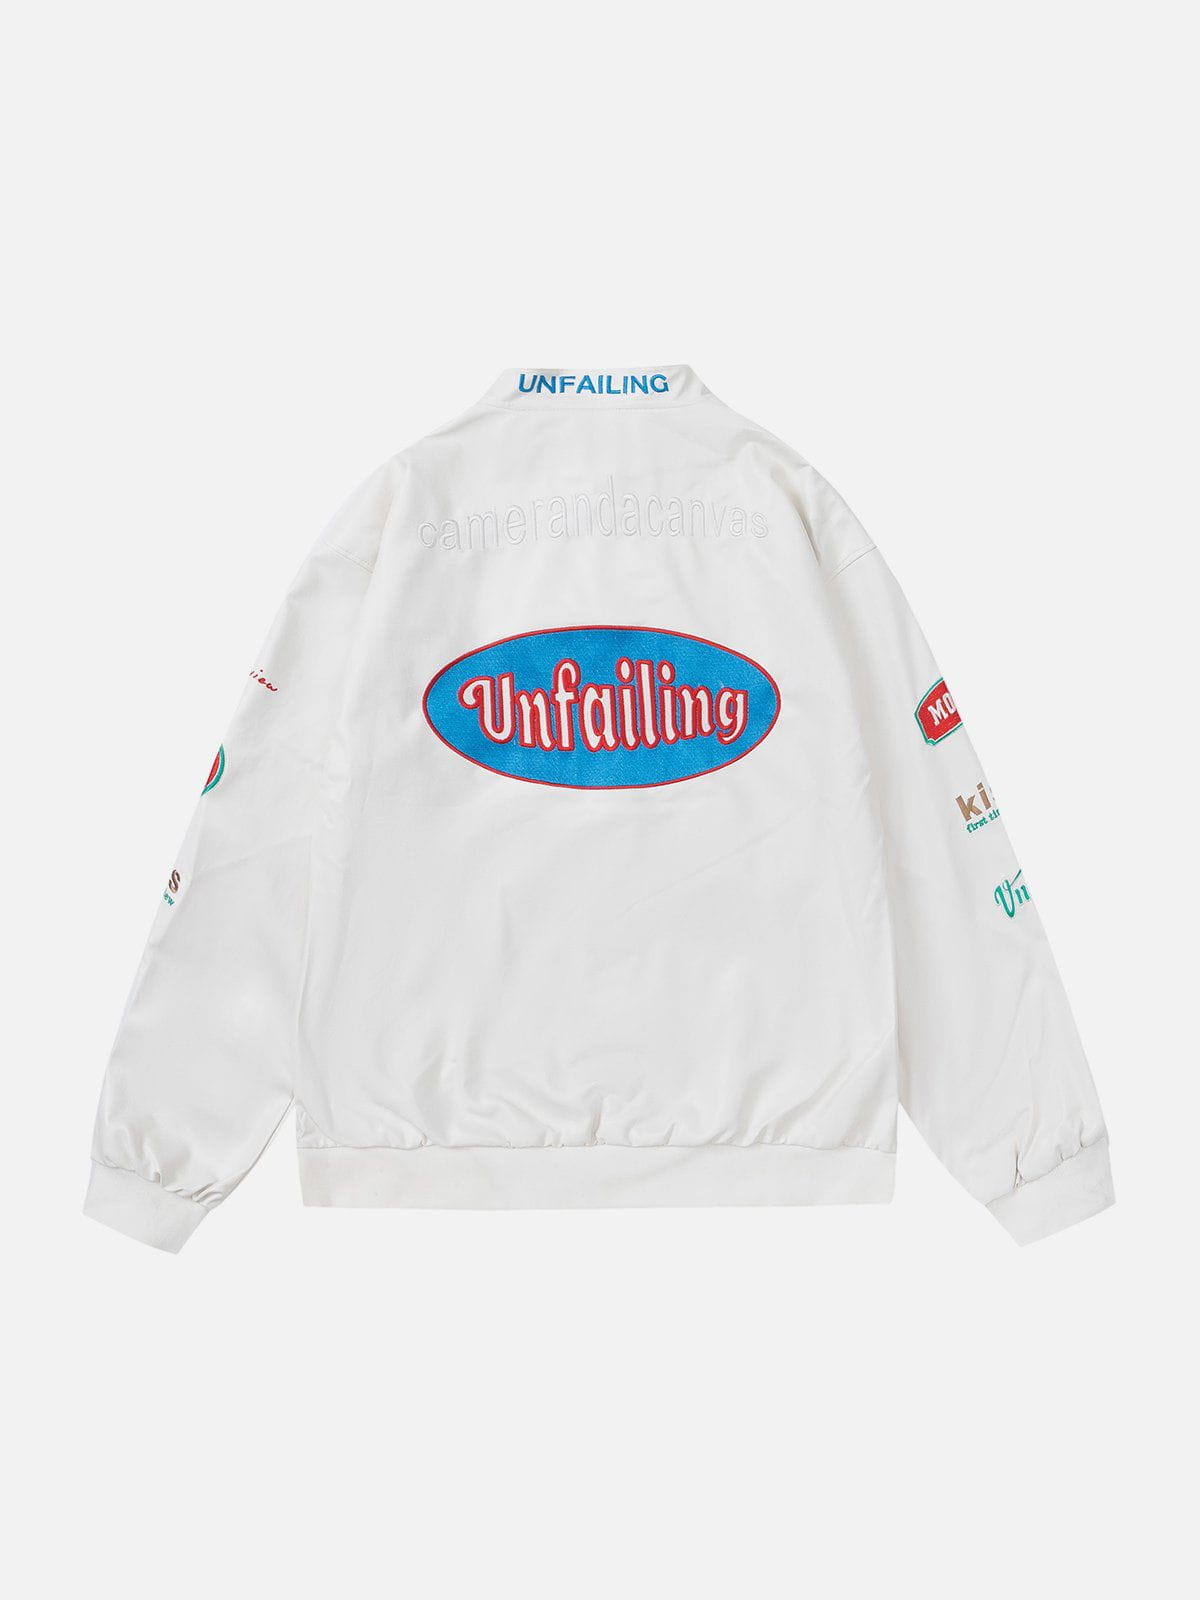 Majesda® - Embroidered Letter Racing Jackets outfit ideas, streetwear fashion - majesda.com